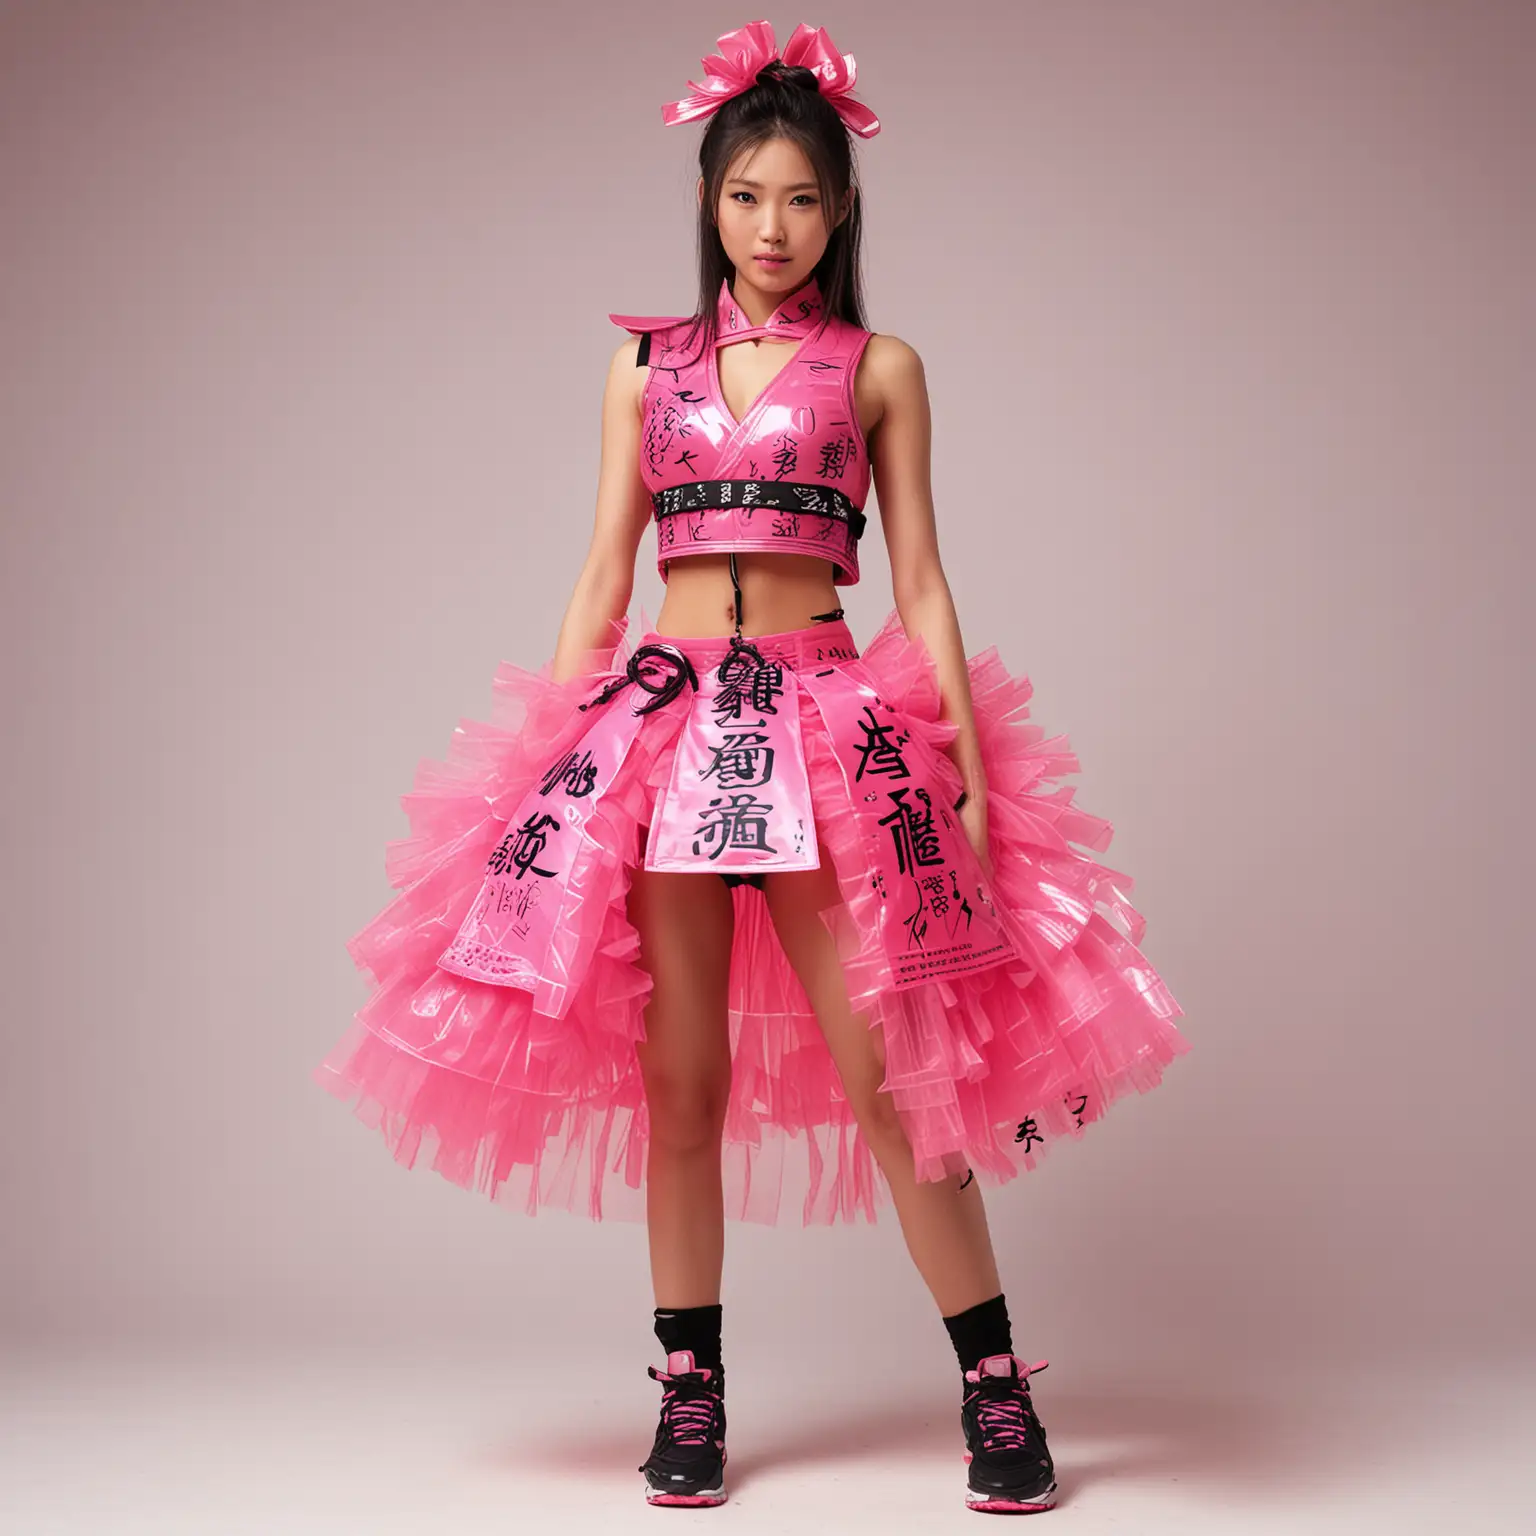 Standing full body view, thin toned beautiful Japanese supermodel with large breasts and thin waist and long legs in sleeveless, hot-pink samurai armor with black chinese writing, midriff exposed, giant hot-pink tutu, black sneakers, sneakers, white background